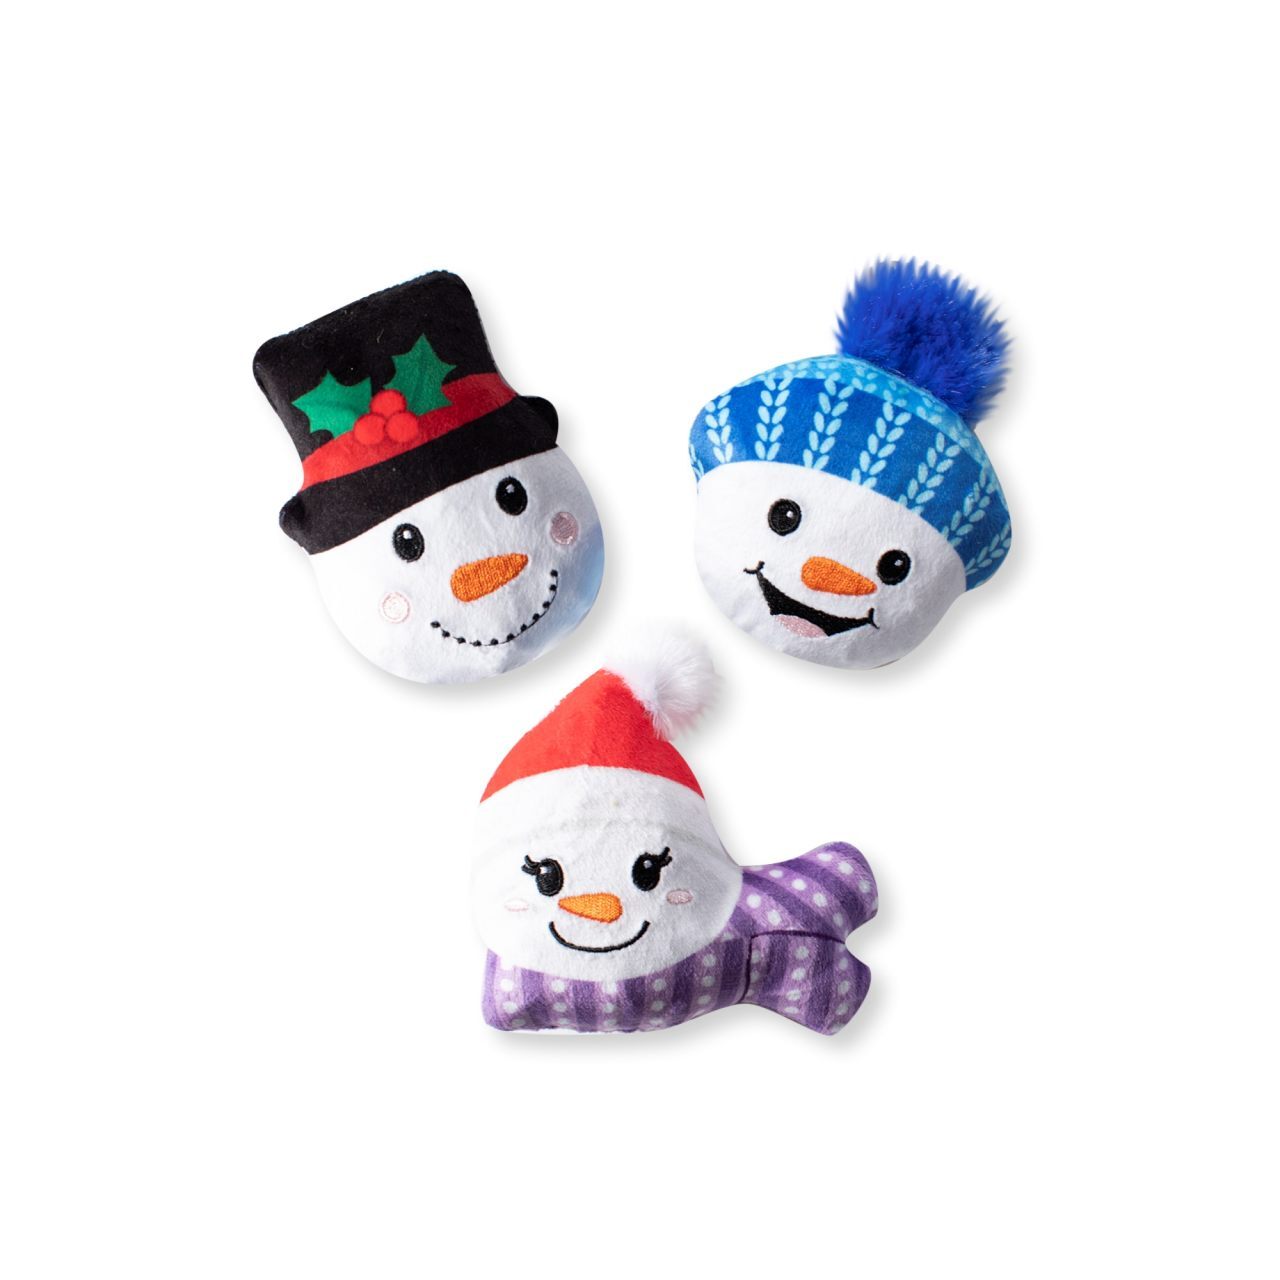 Snow Excited Plush Toys 3-Pack